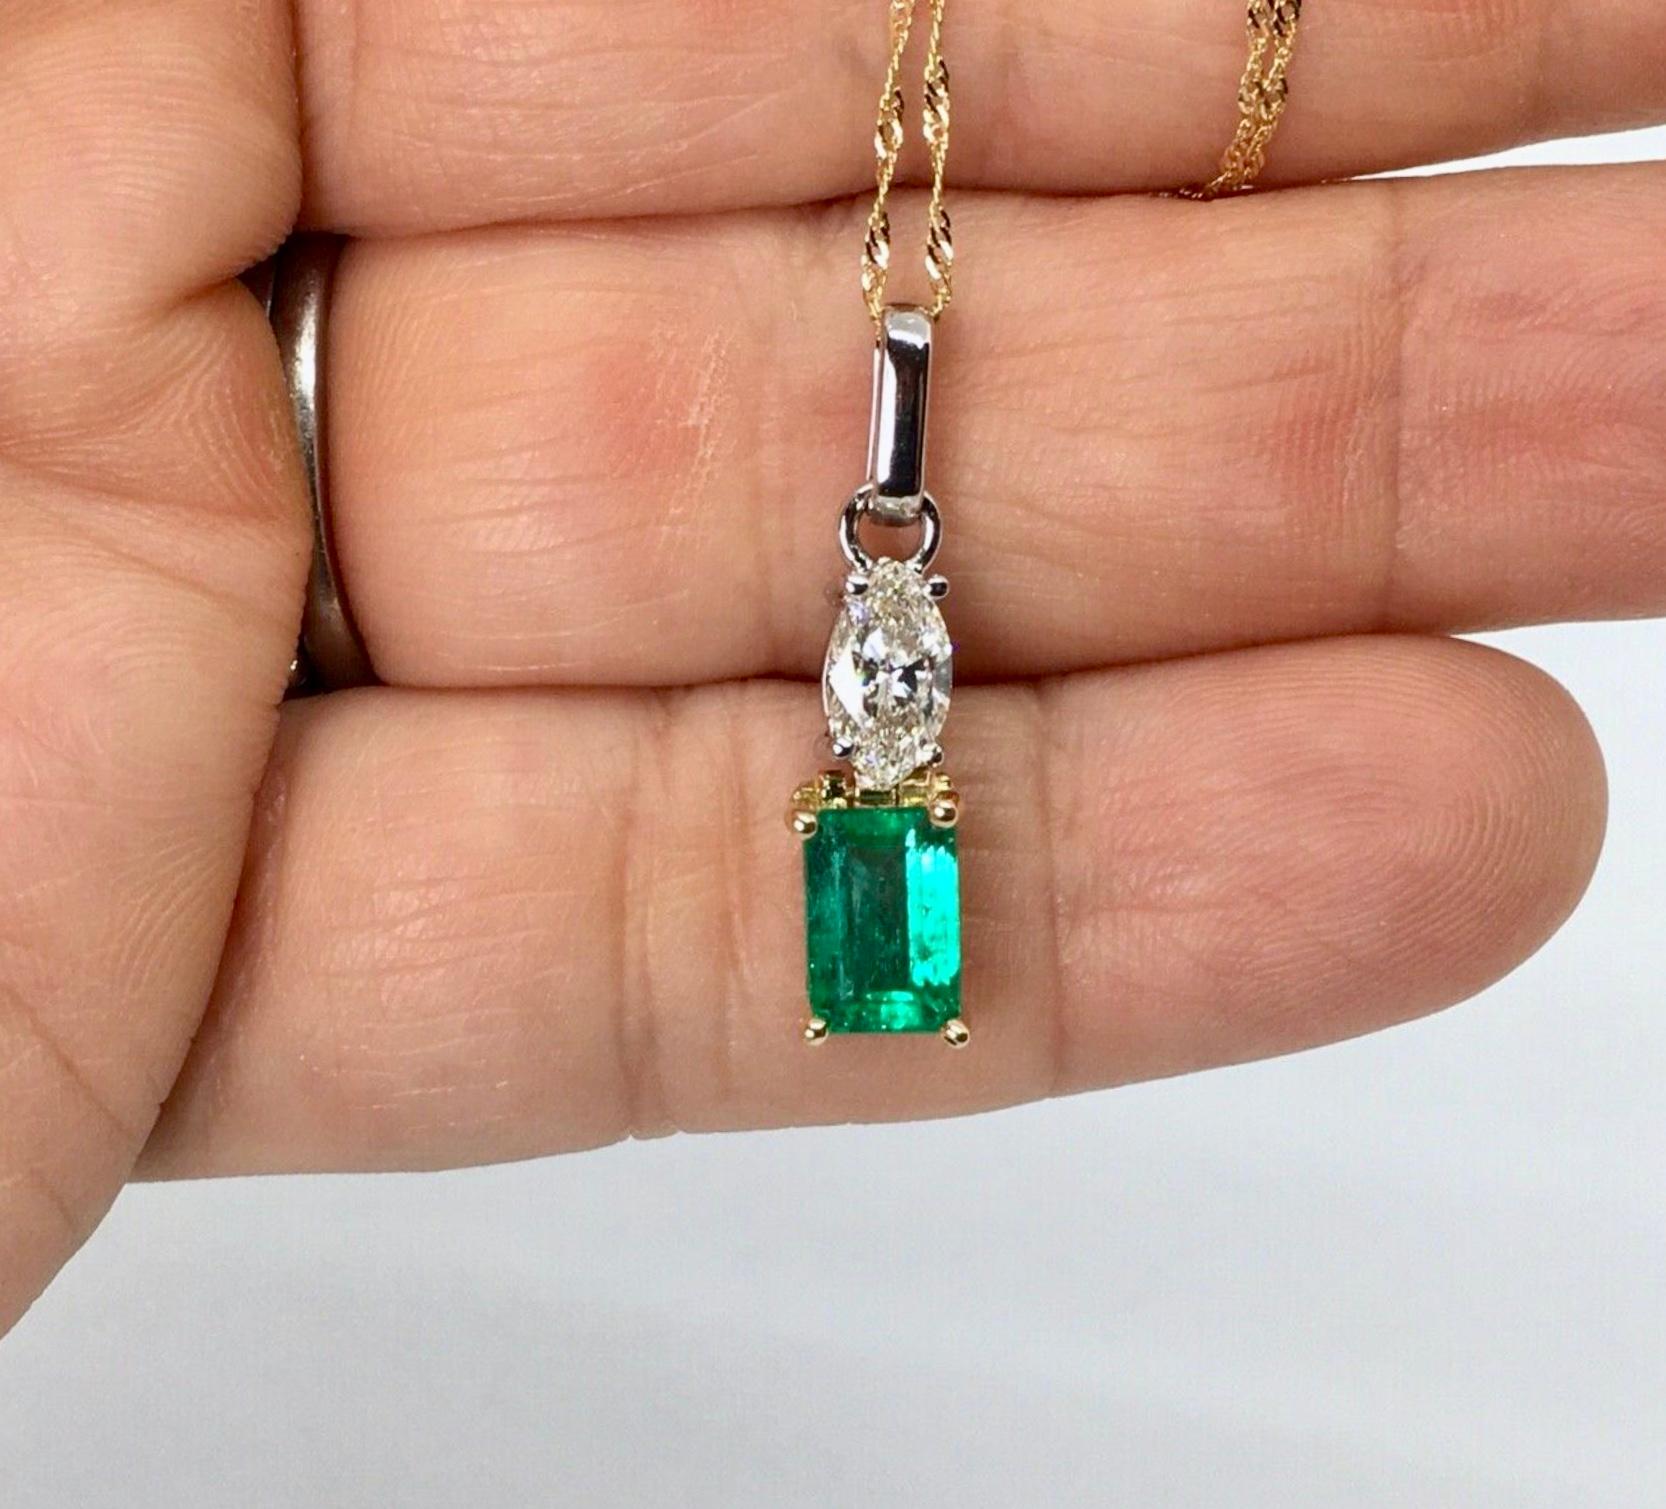 Fine AAA Colombian Emerald Diamond Solitaire Pendant Drop Necklace 18K Gold
Fine Natural Colombian Emerald, Emerald Cut 1.80 Carat - VS, AAA Vivid Intense Medium Green - Fully Saturated, Excellent Clarity & Transparency. Diamond Marquise Cut Weight